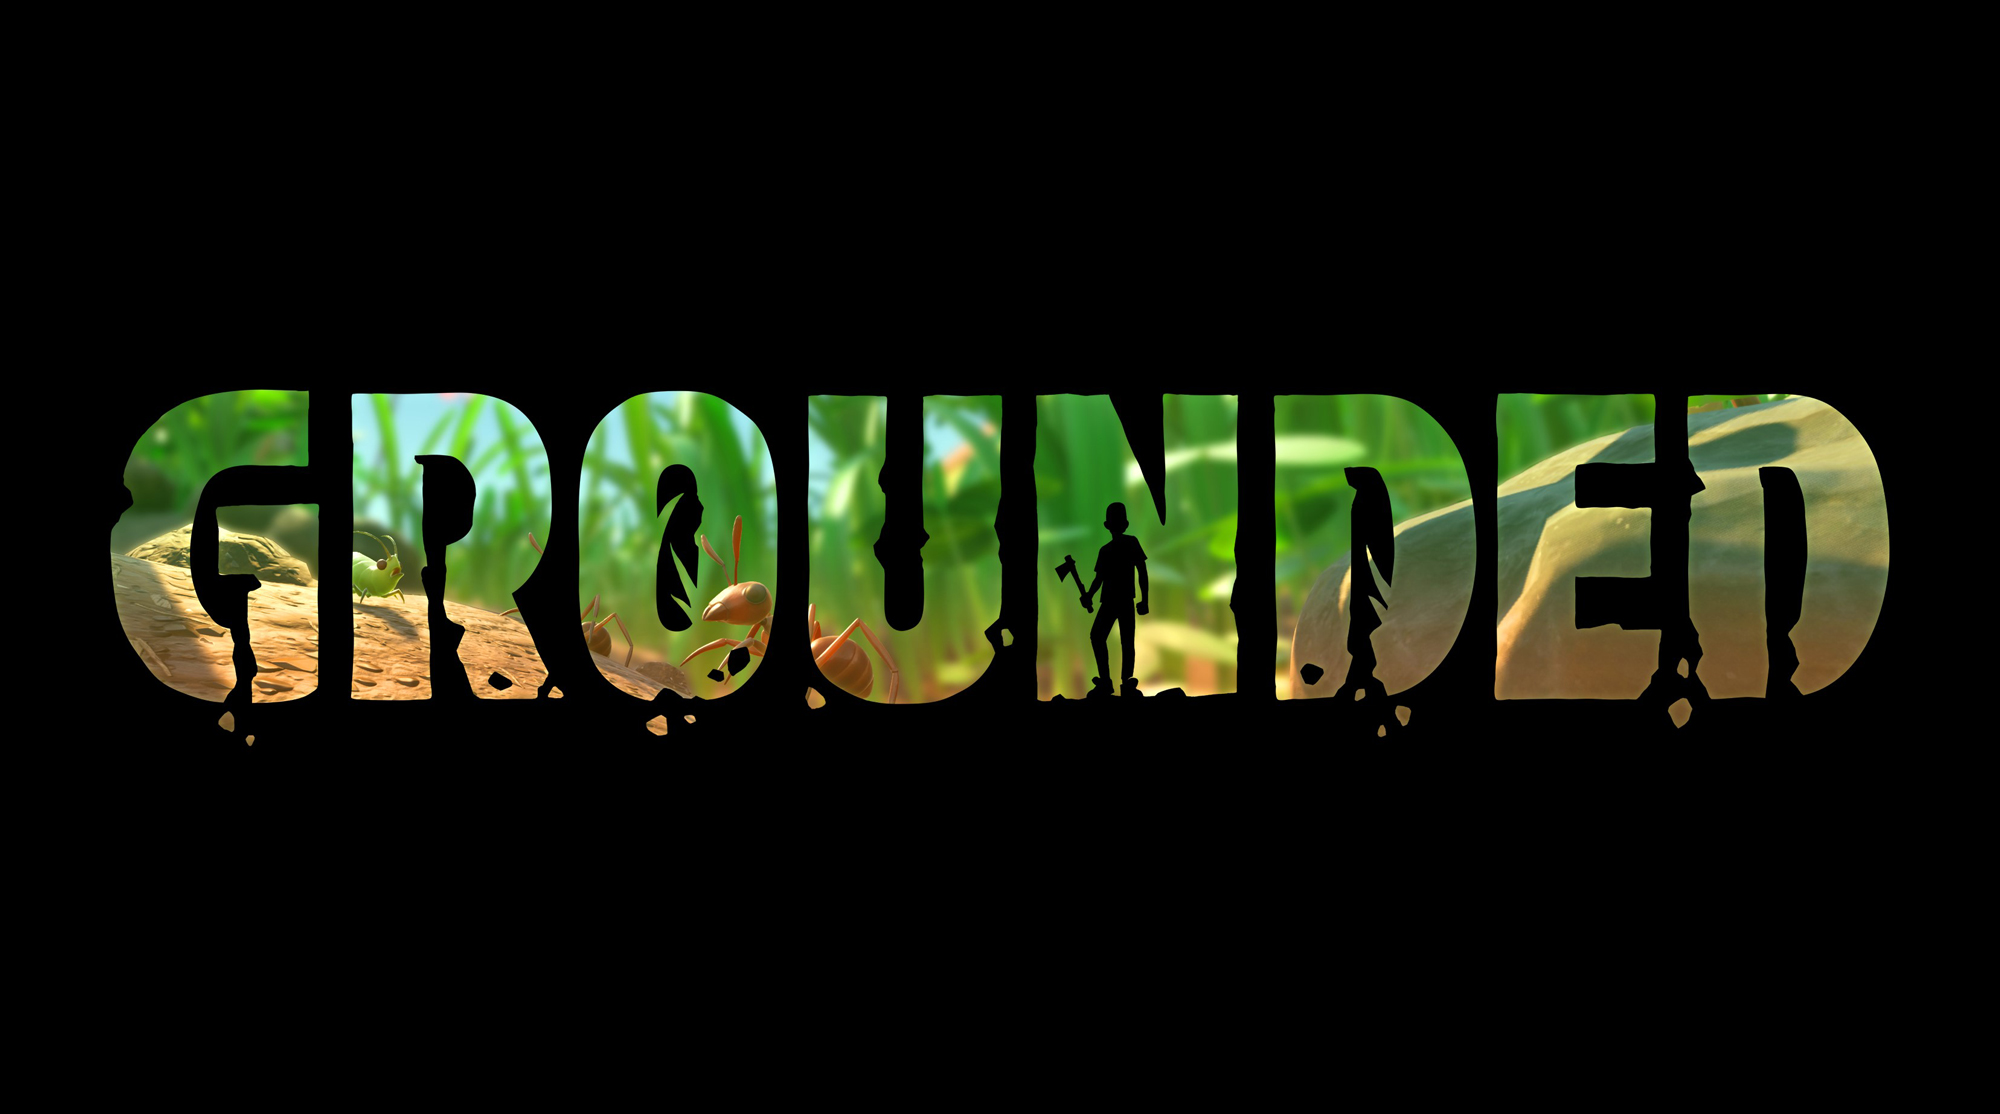 grounded xbox one release date